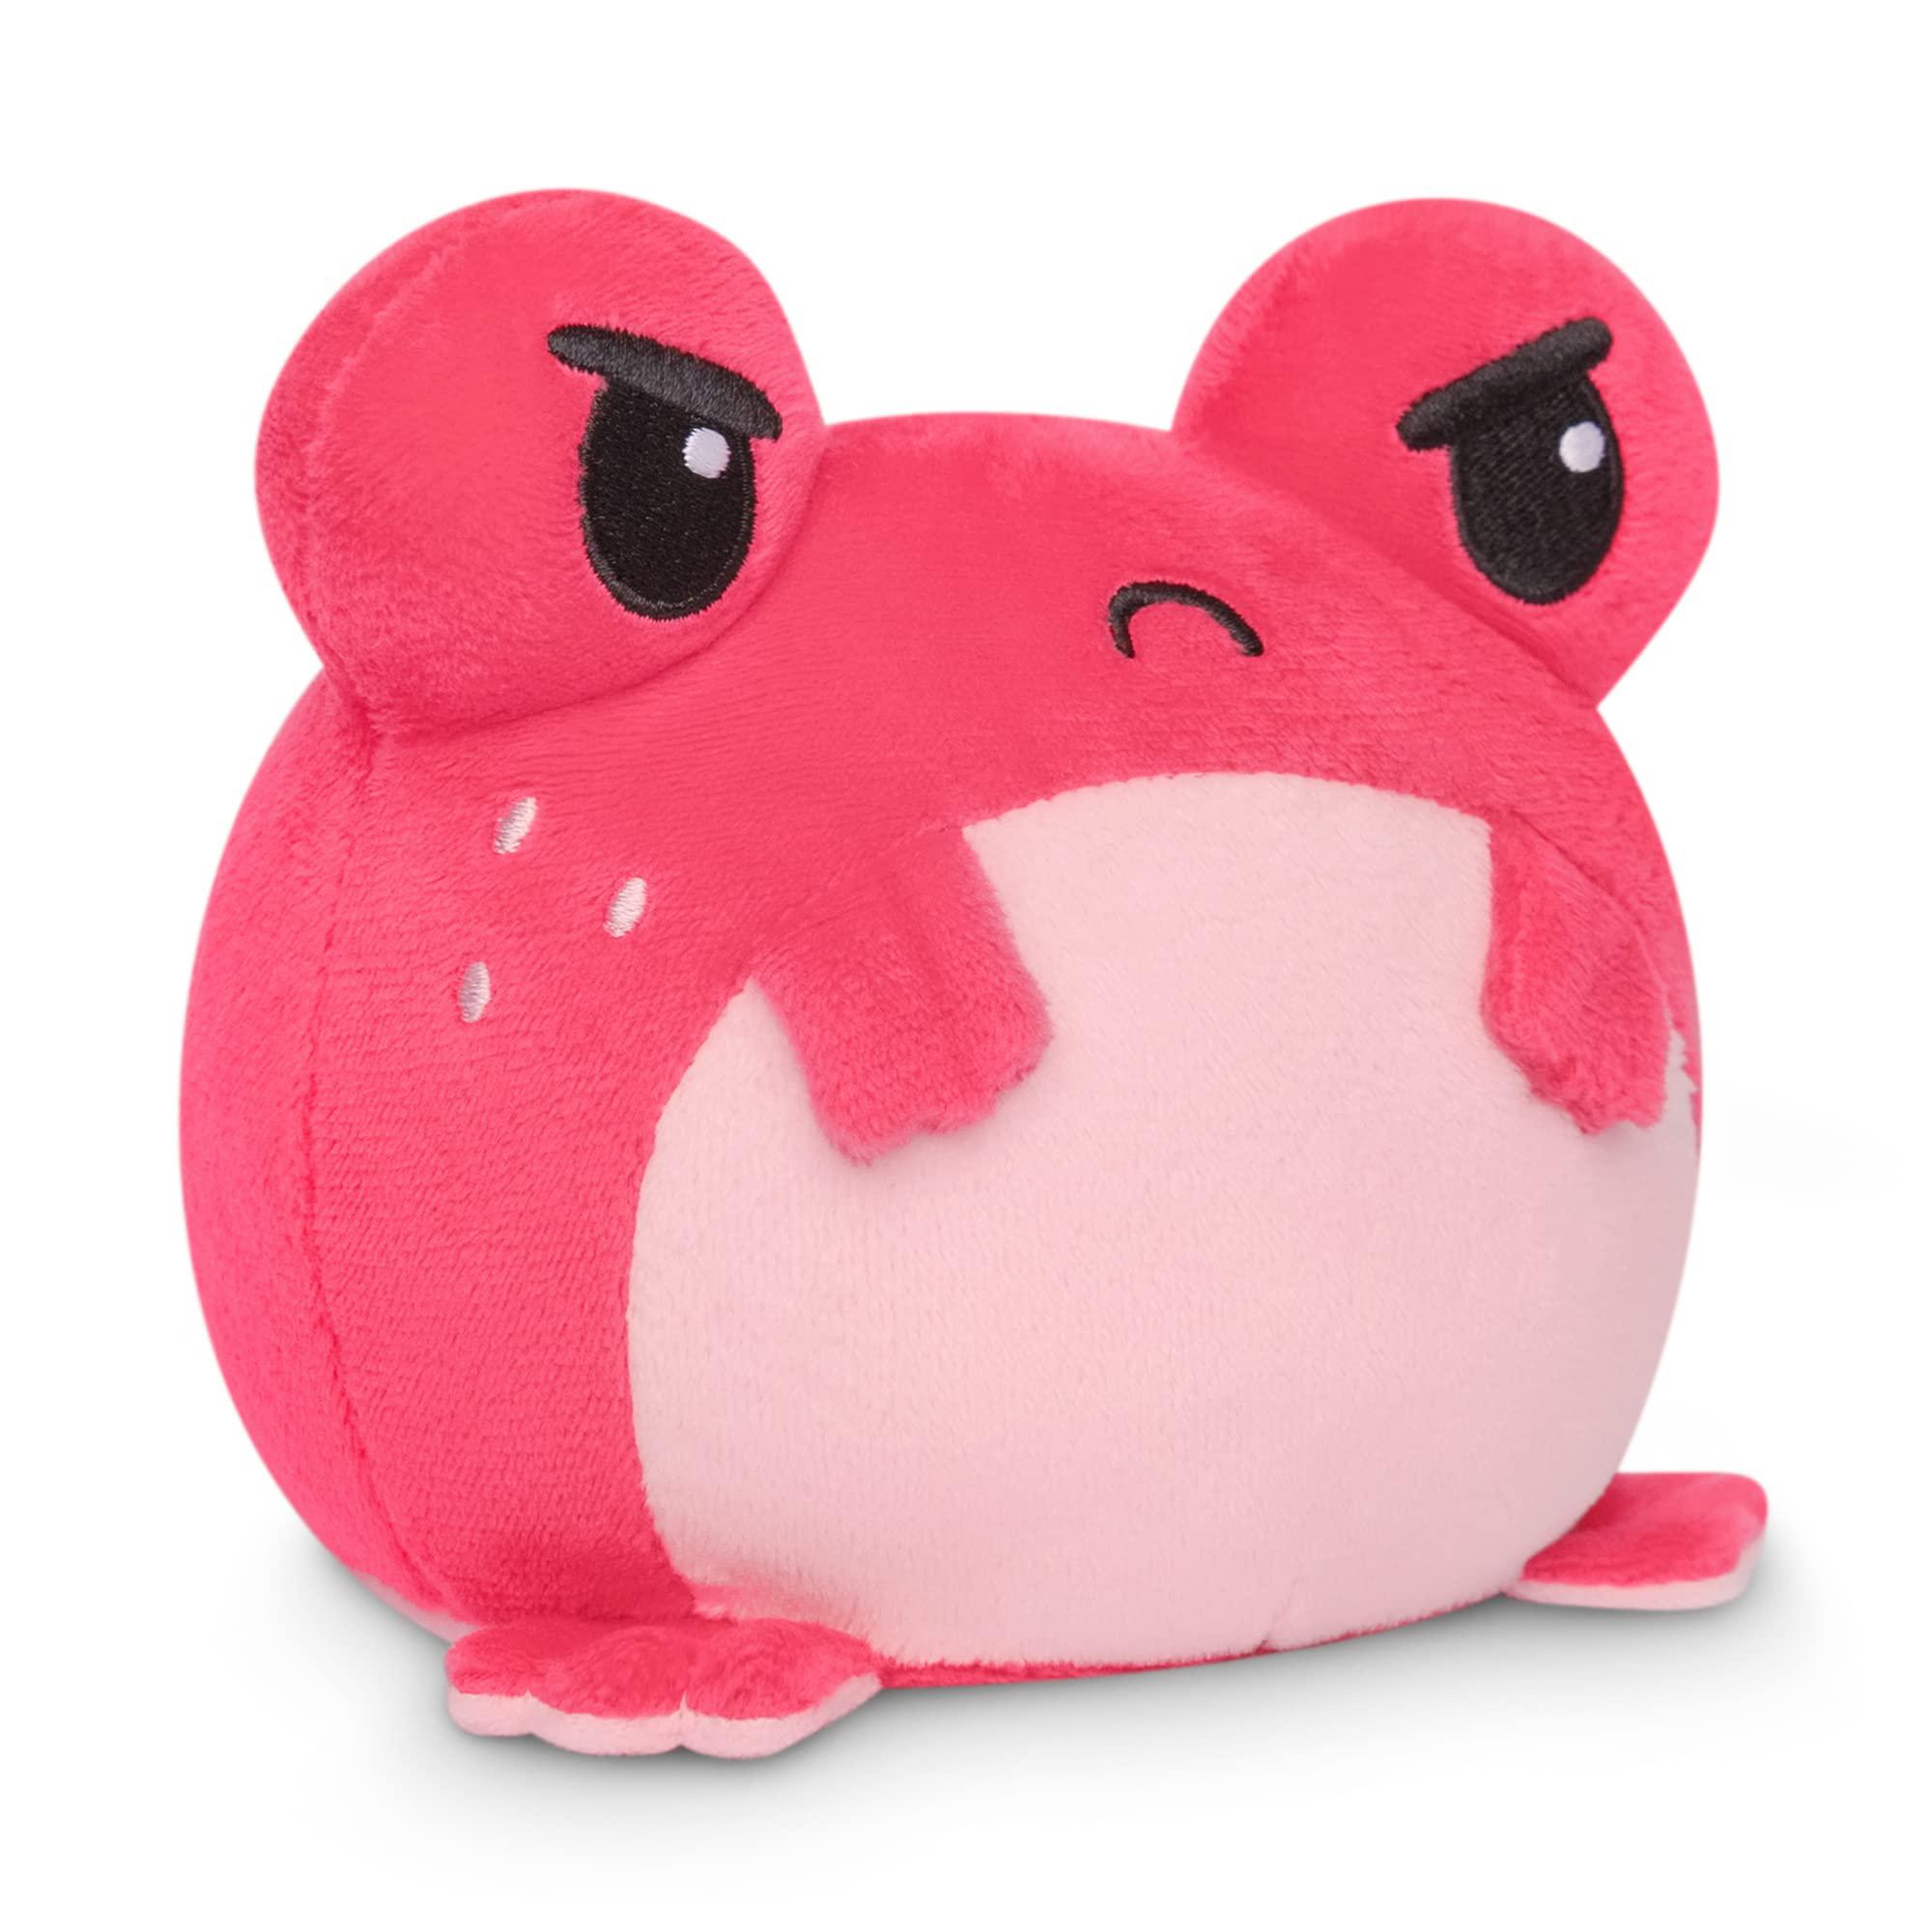 teeturtle | the original reversible frog plushie | patented design | sensory fidget toy for stress relief | happy + angry str